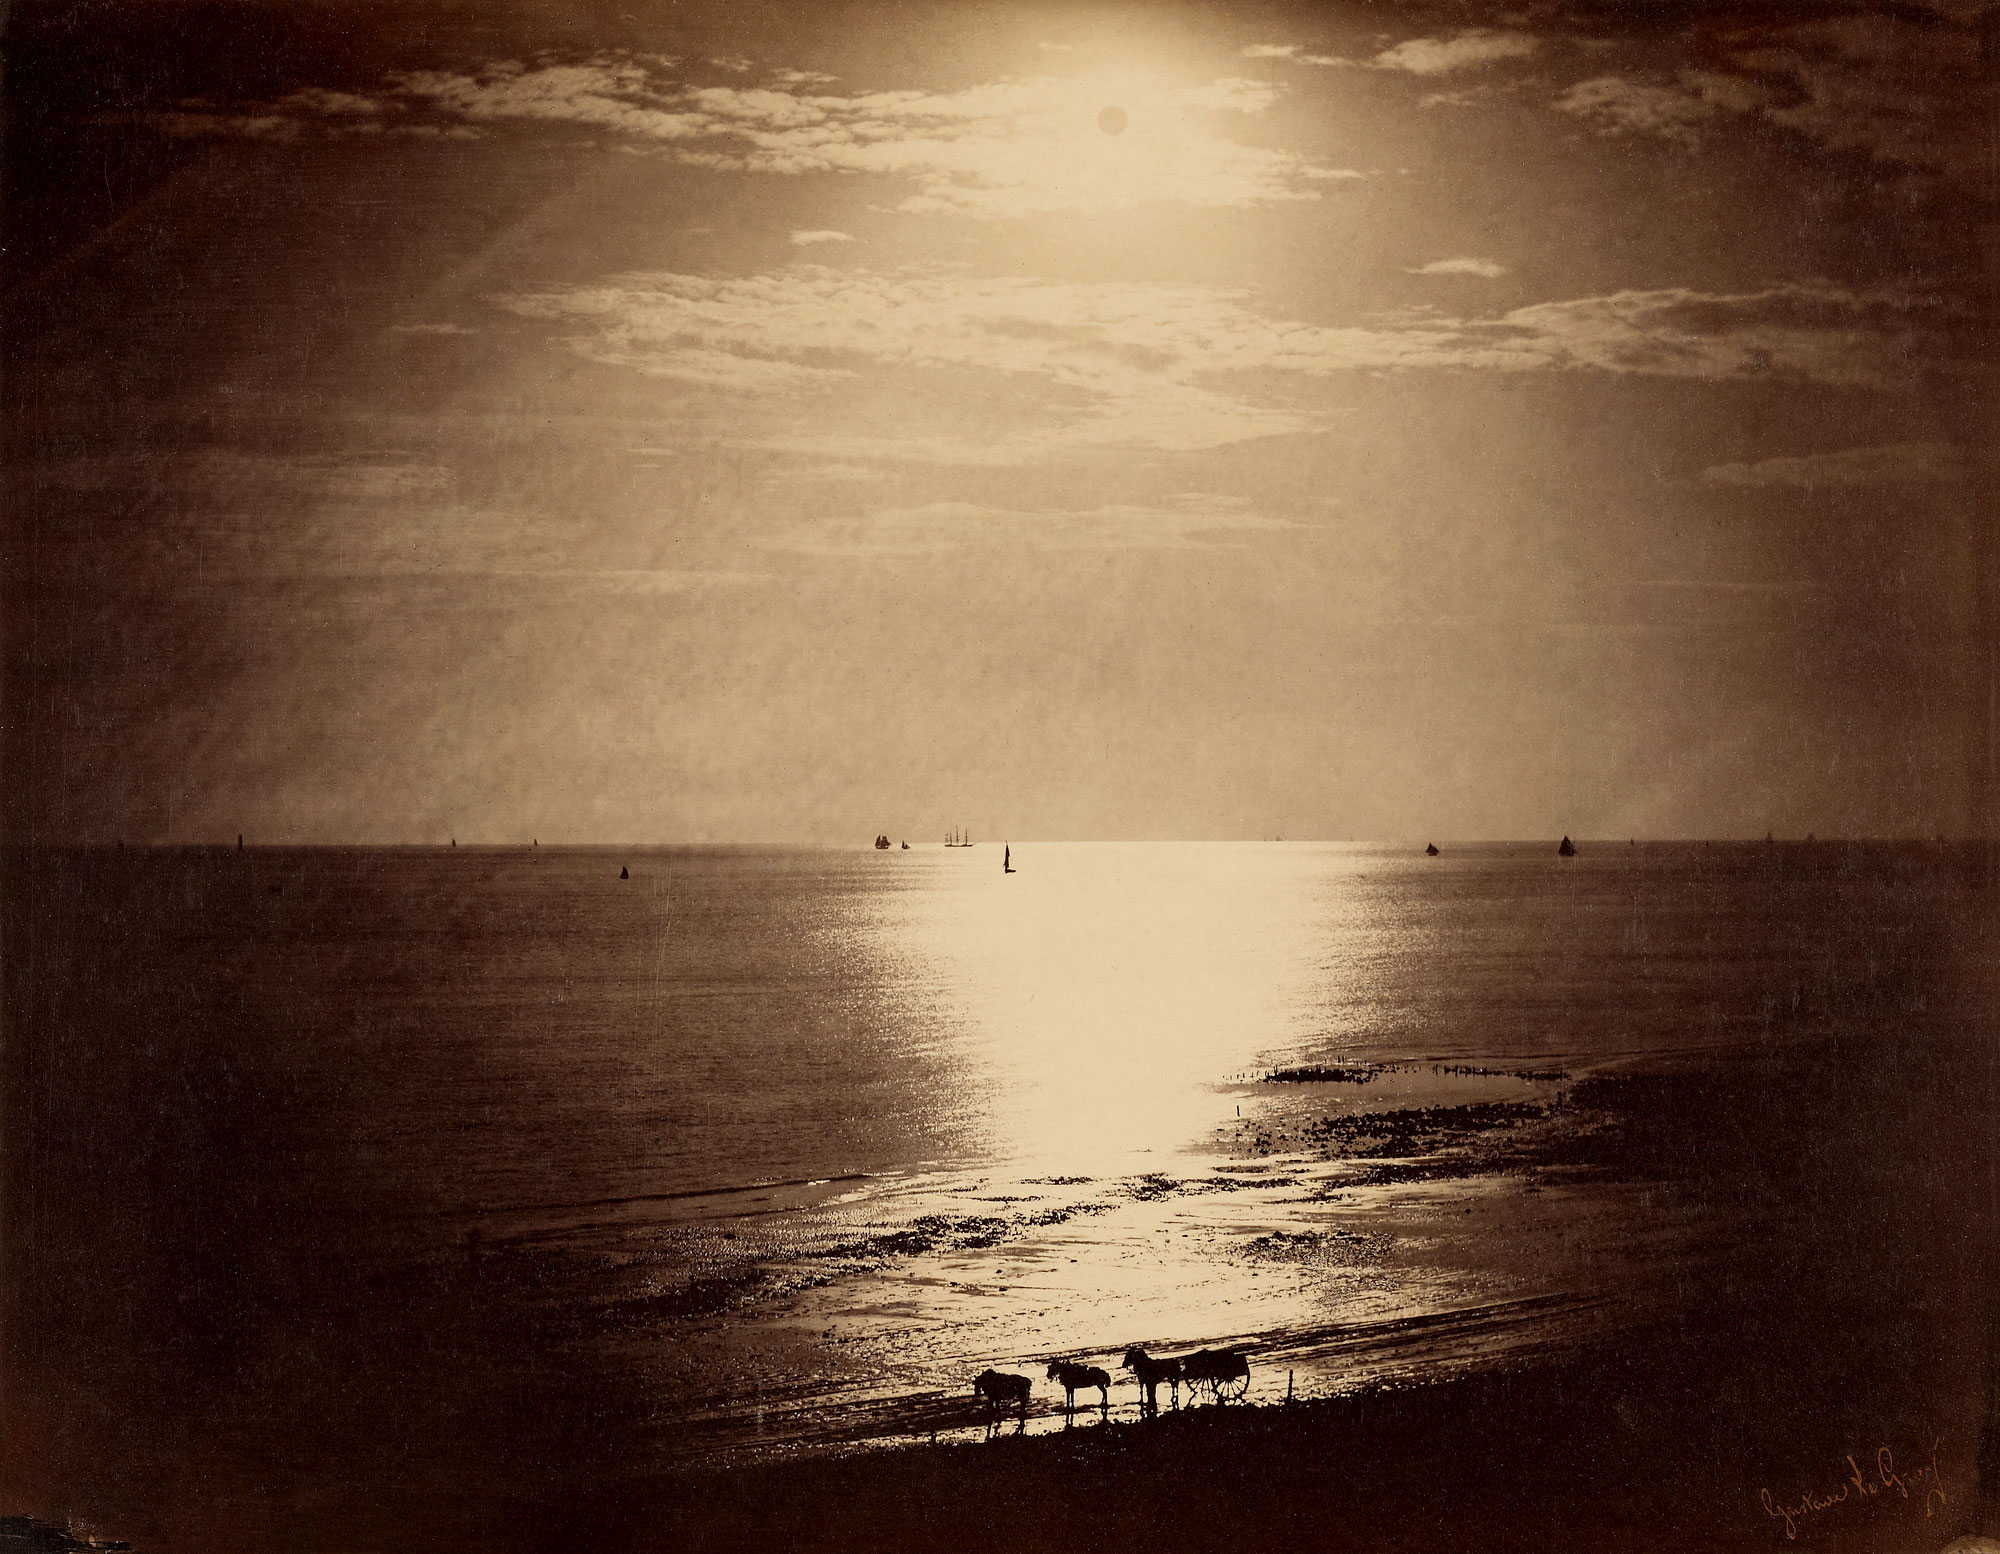 Gustave Le Gray (French, 1820-1884) 'The Sun at Its Zenith, Normandy' 1856